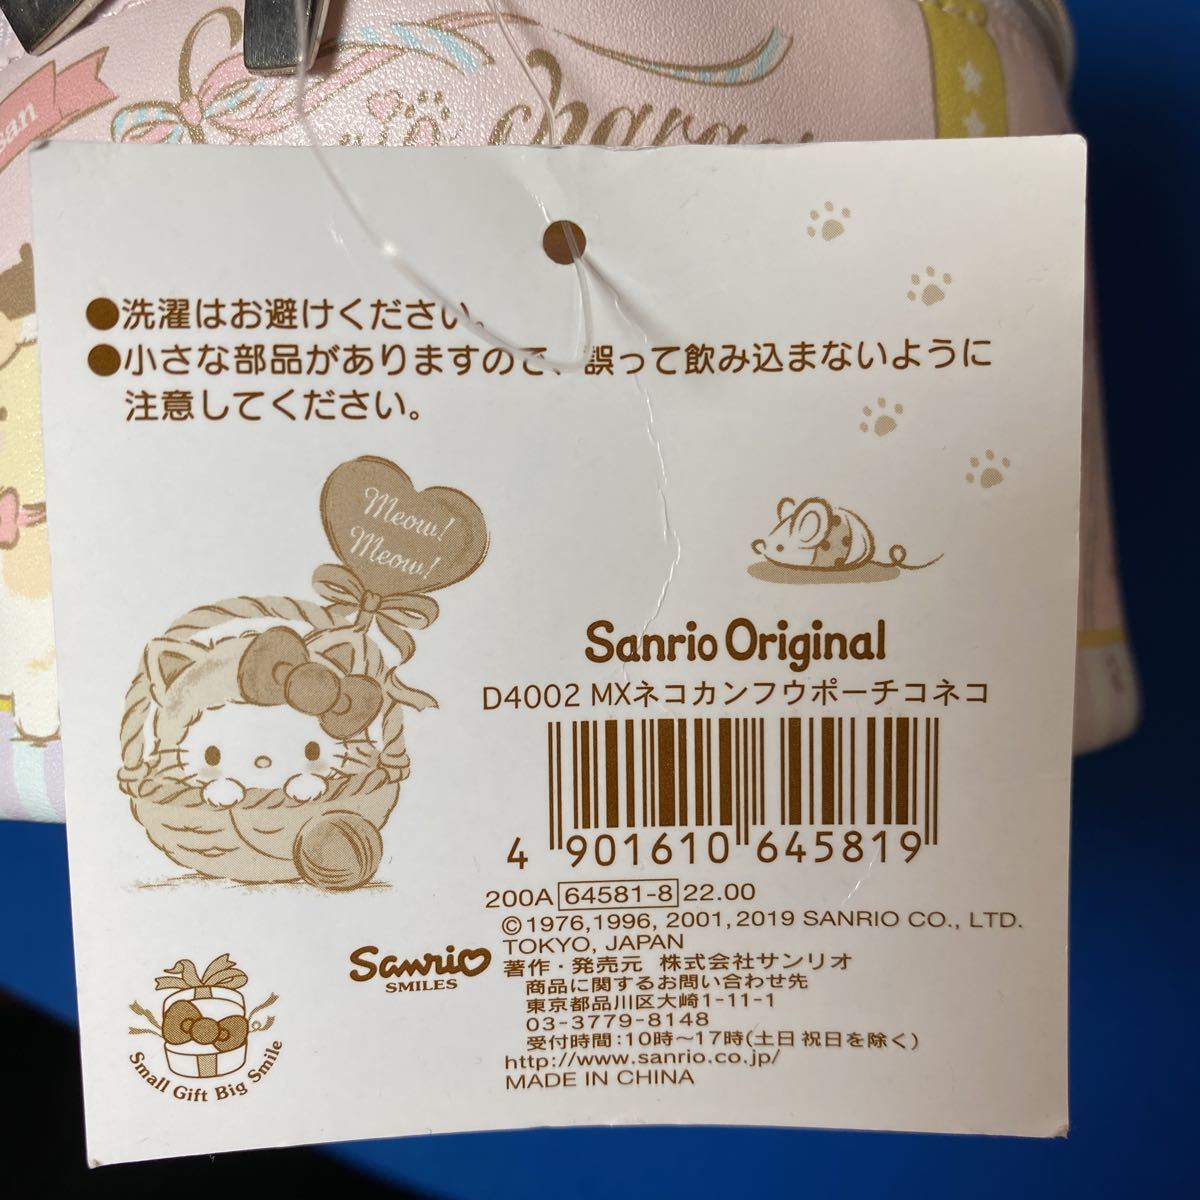 * Sanrio character z* cat can manner pouch * cat * vanity pouch * Sanrio original * case * make-up pouch * unused * Kitty *